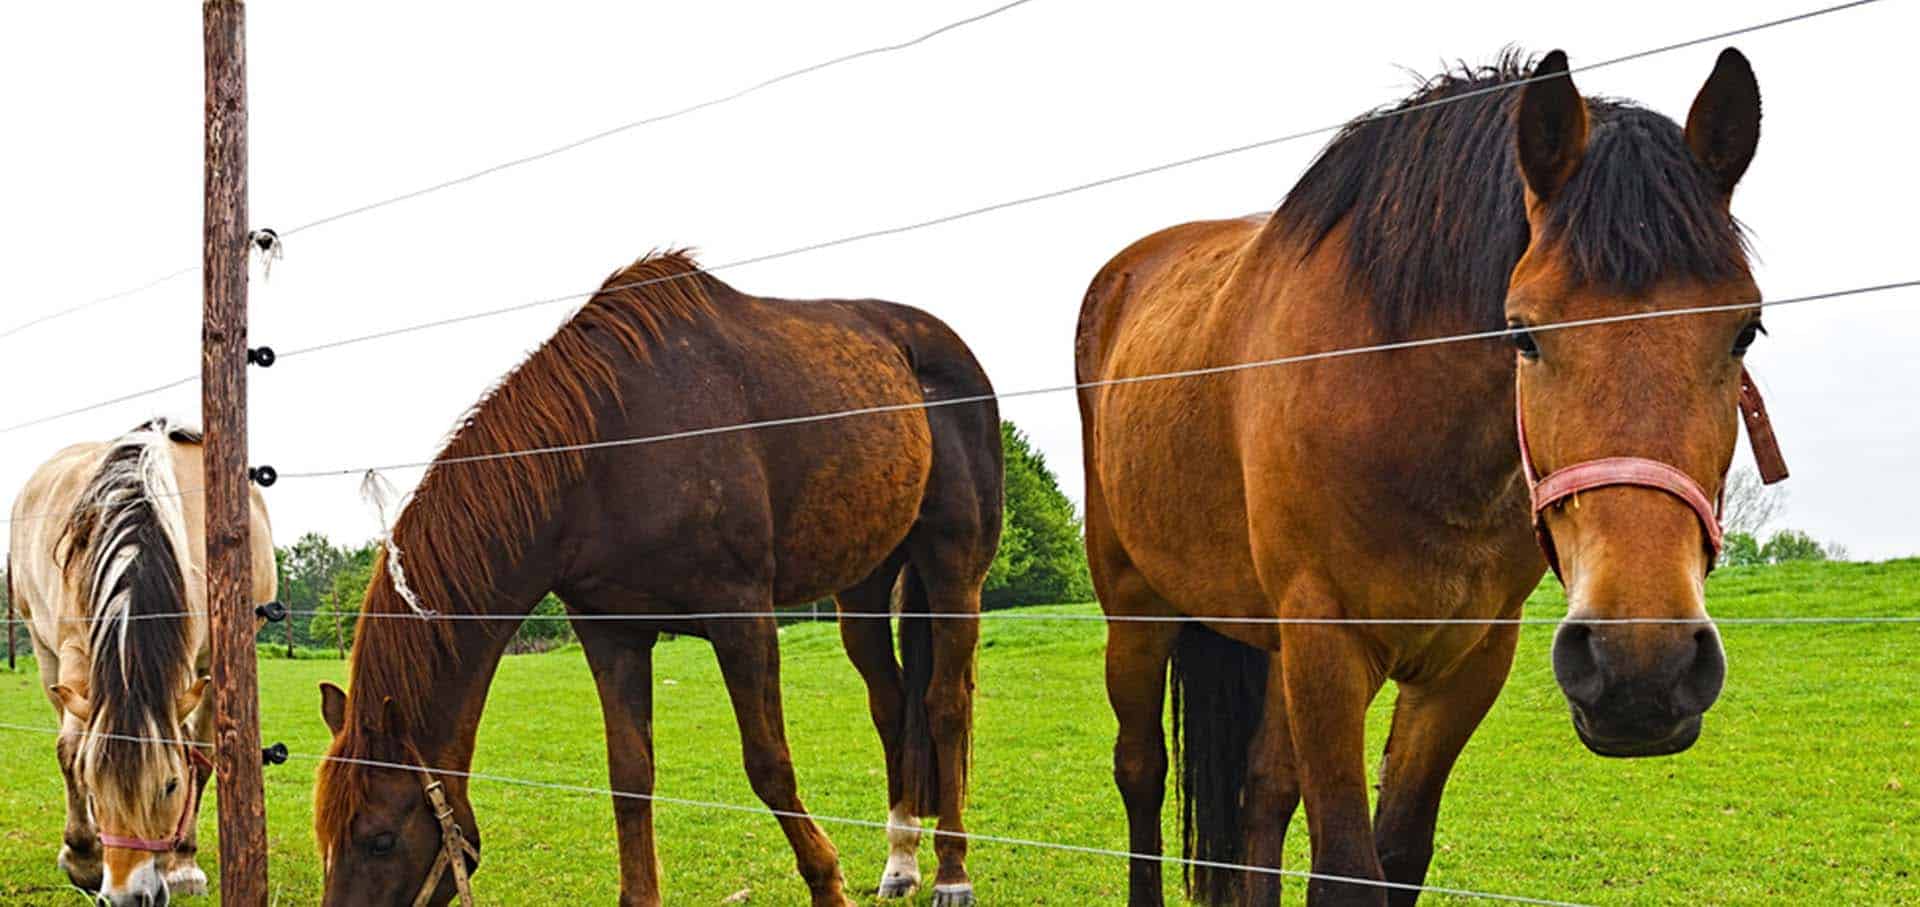 Horses inside wire fences — Best Veterinary Services in Bundaberg, QLD